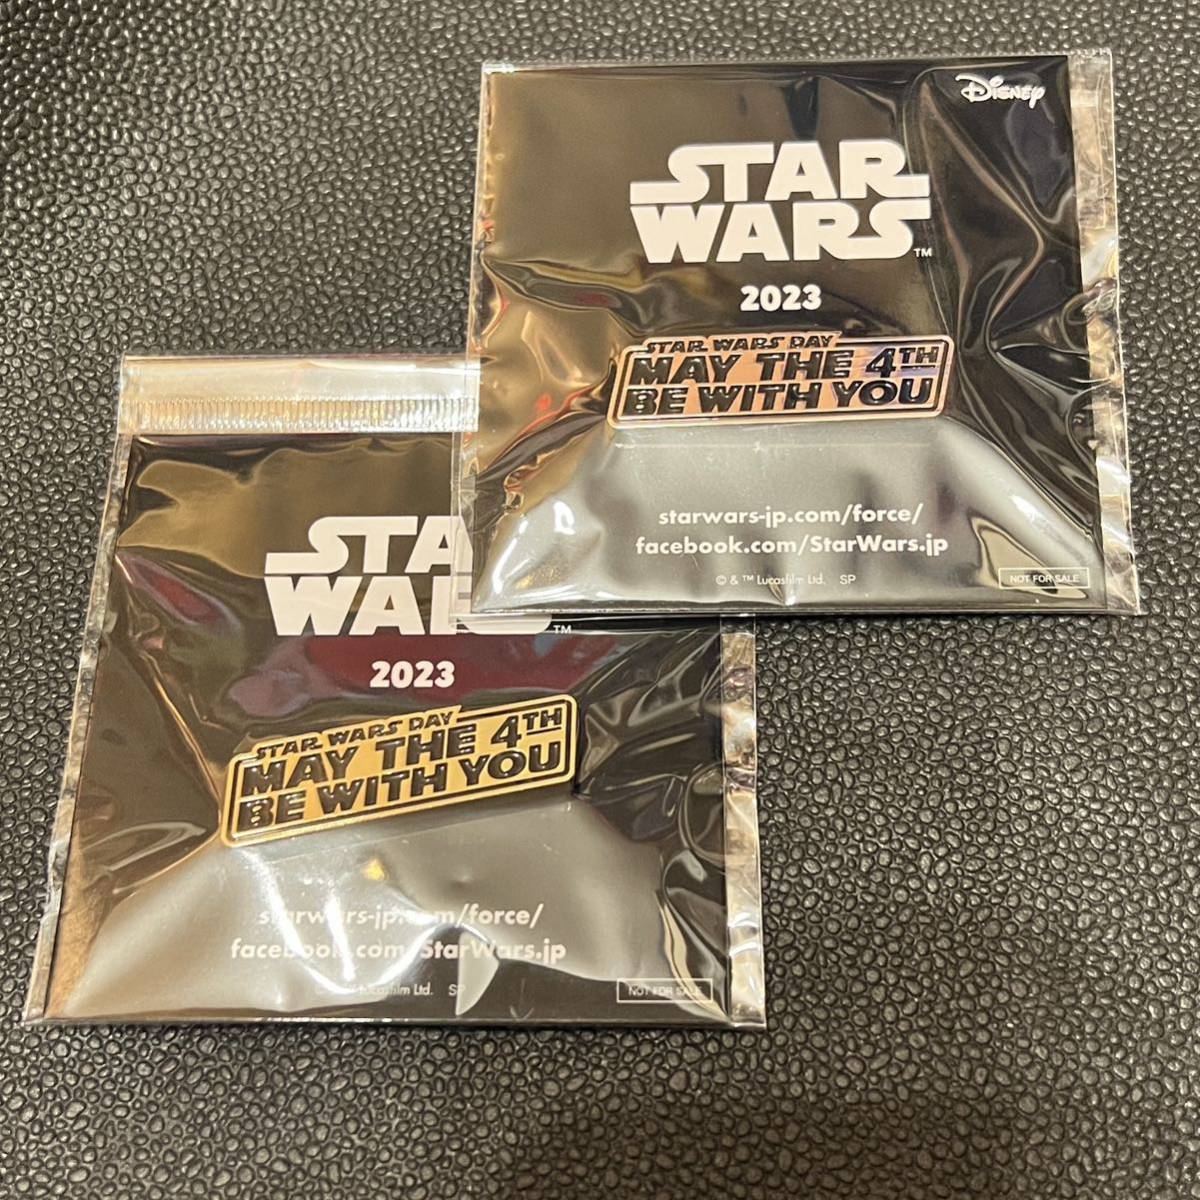  Star Wars. day not for sale pin badge 2 kind set may the 4th be with you